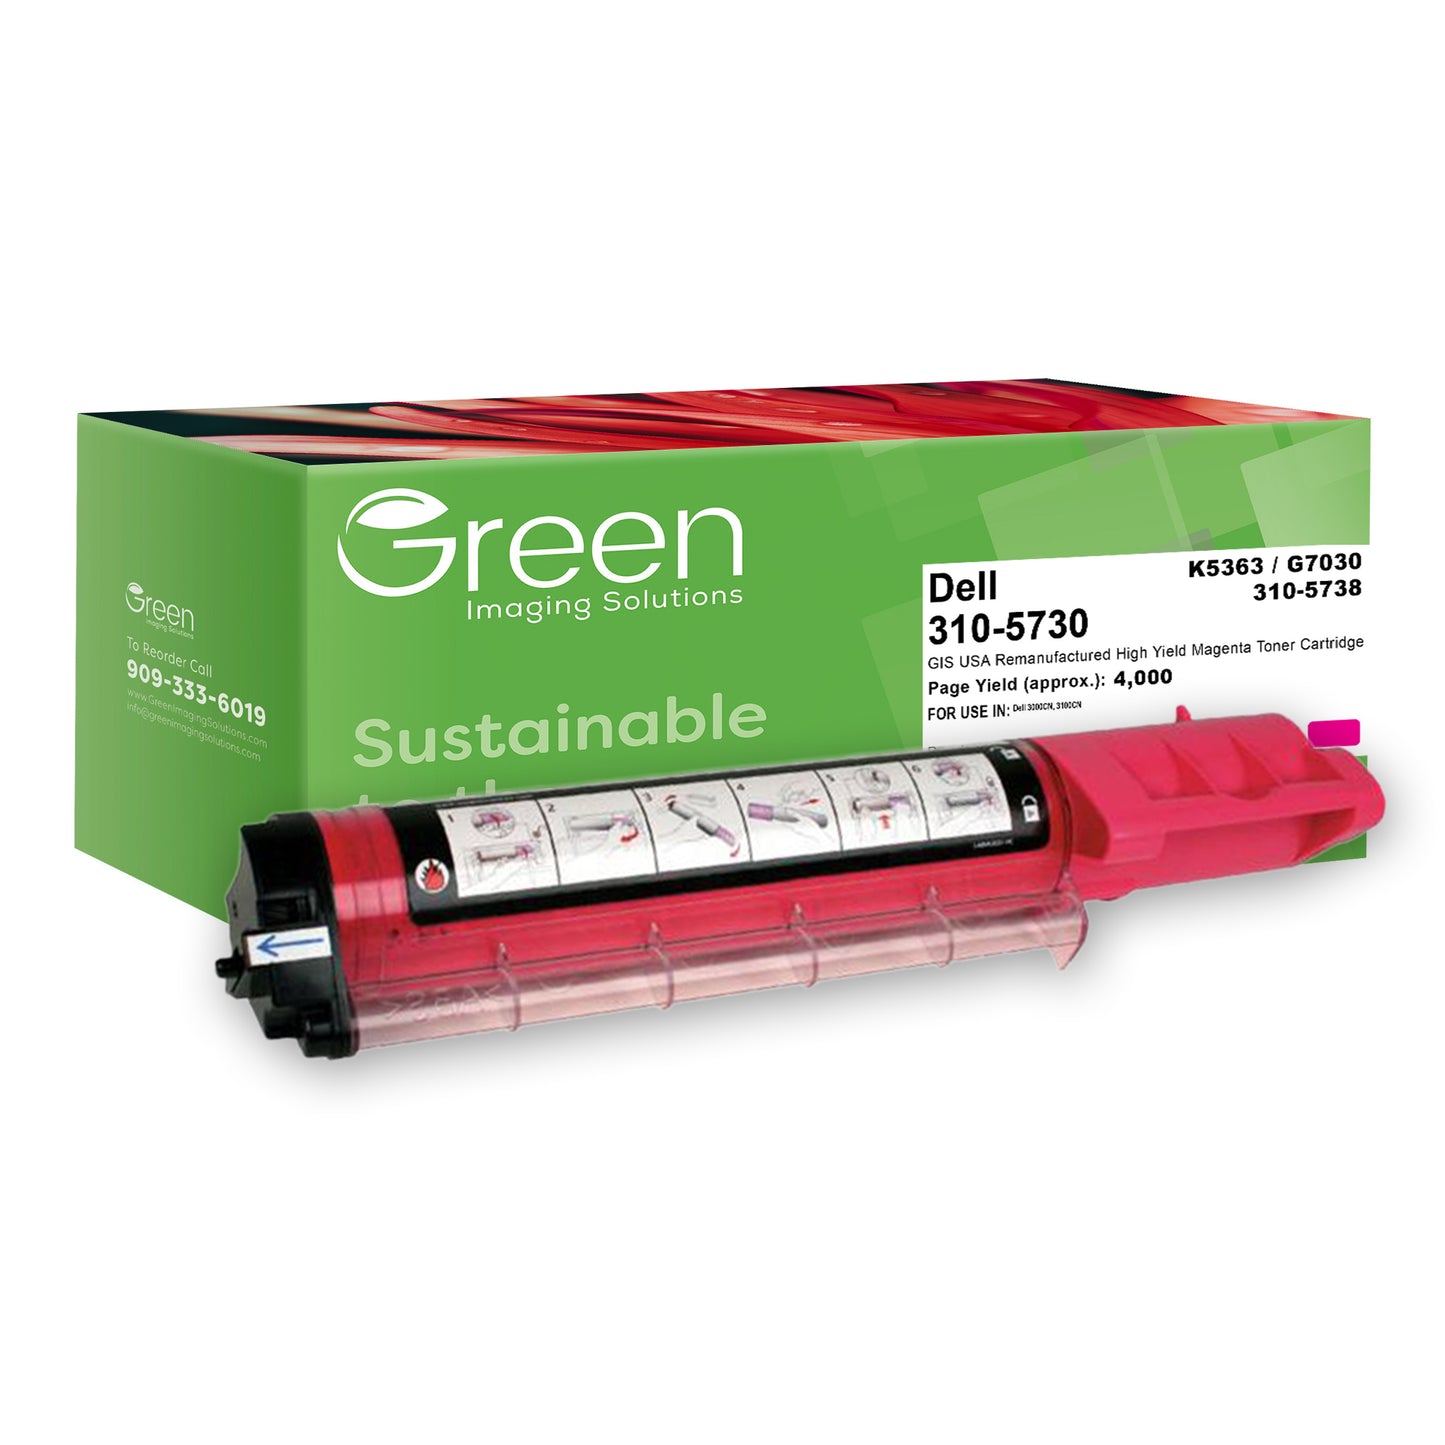 Green Imaging Solutions USA Remanufactured Non-OEM New High Yield Magenta Toner Cartridge for Dell 3000/3100